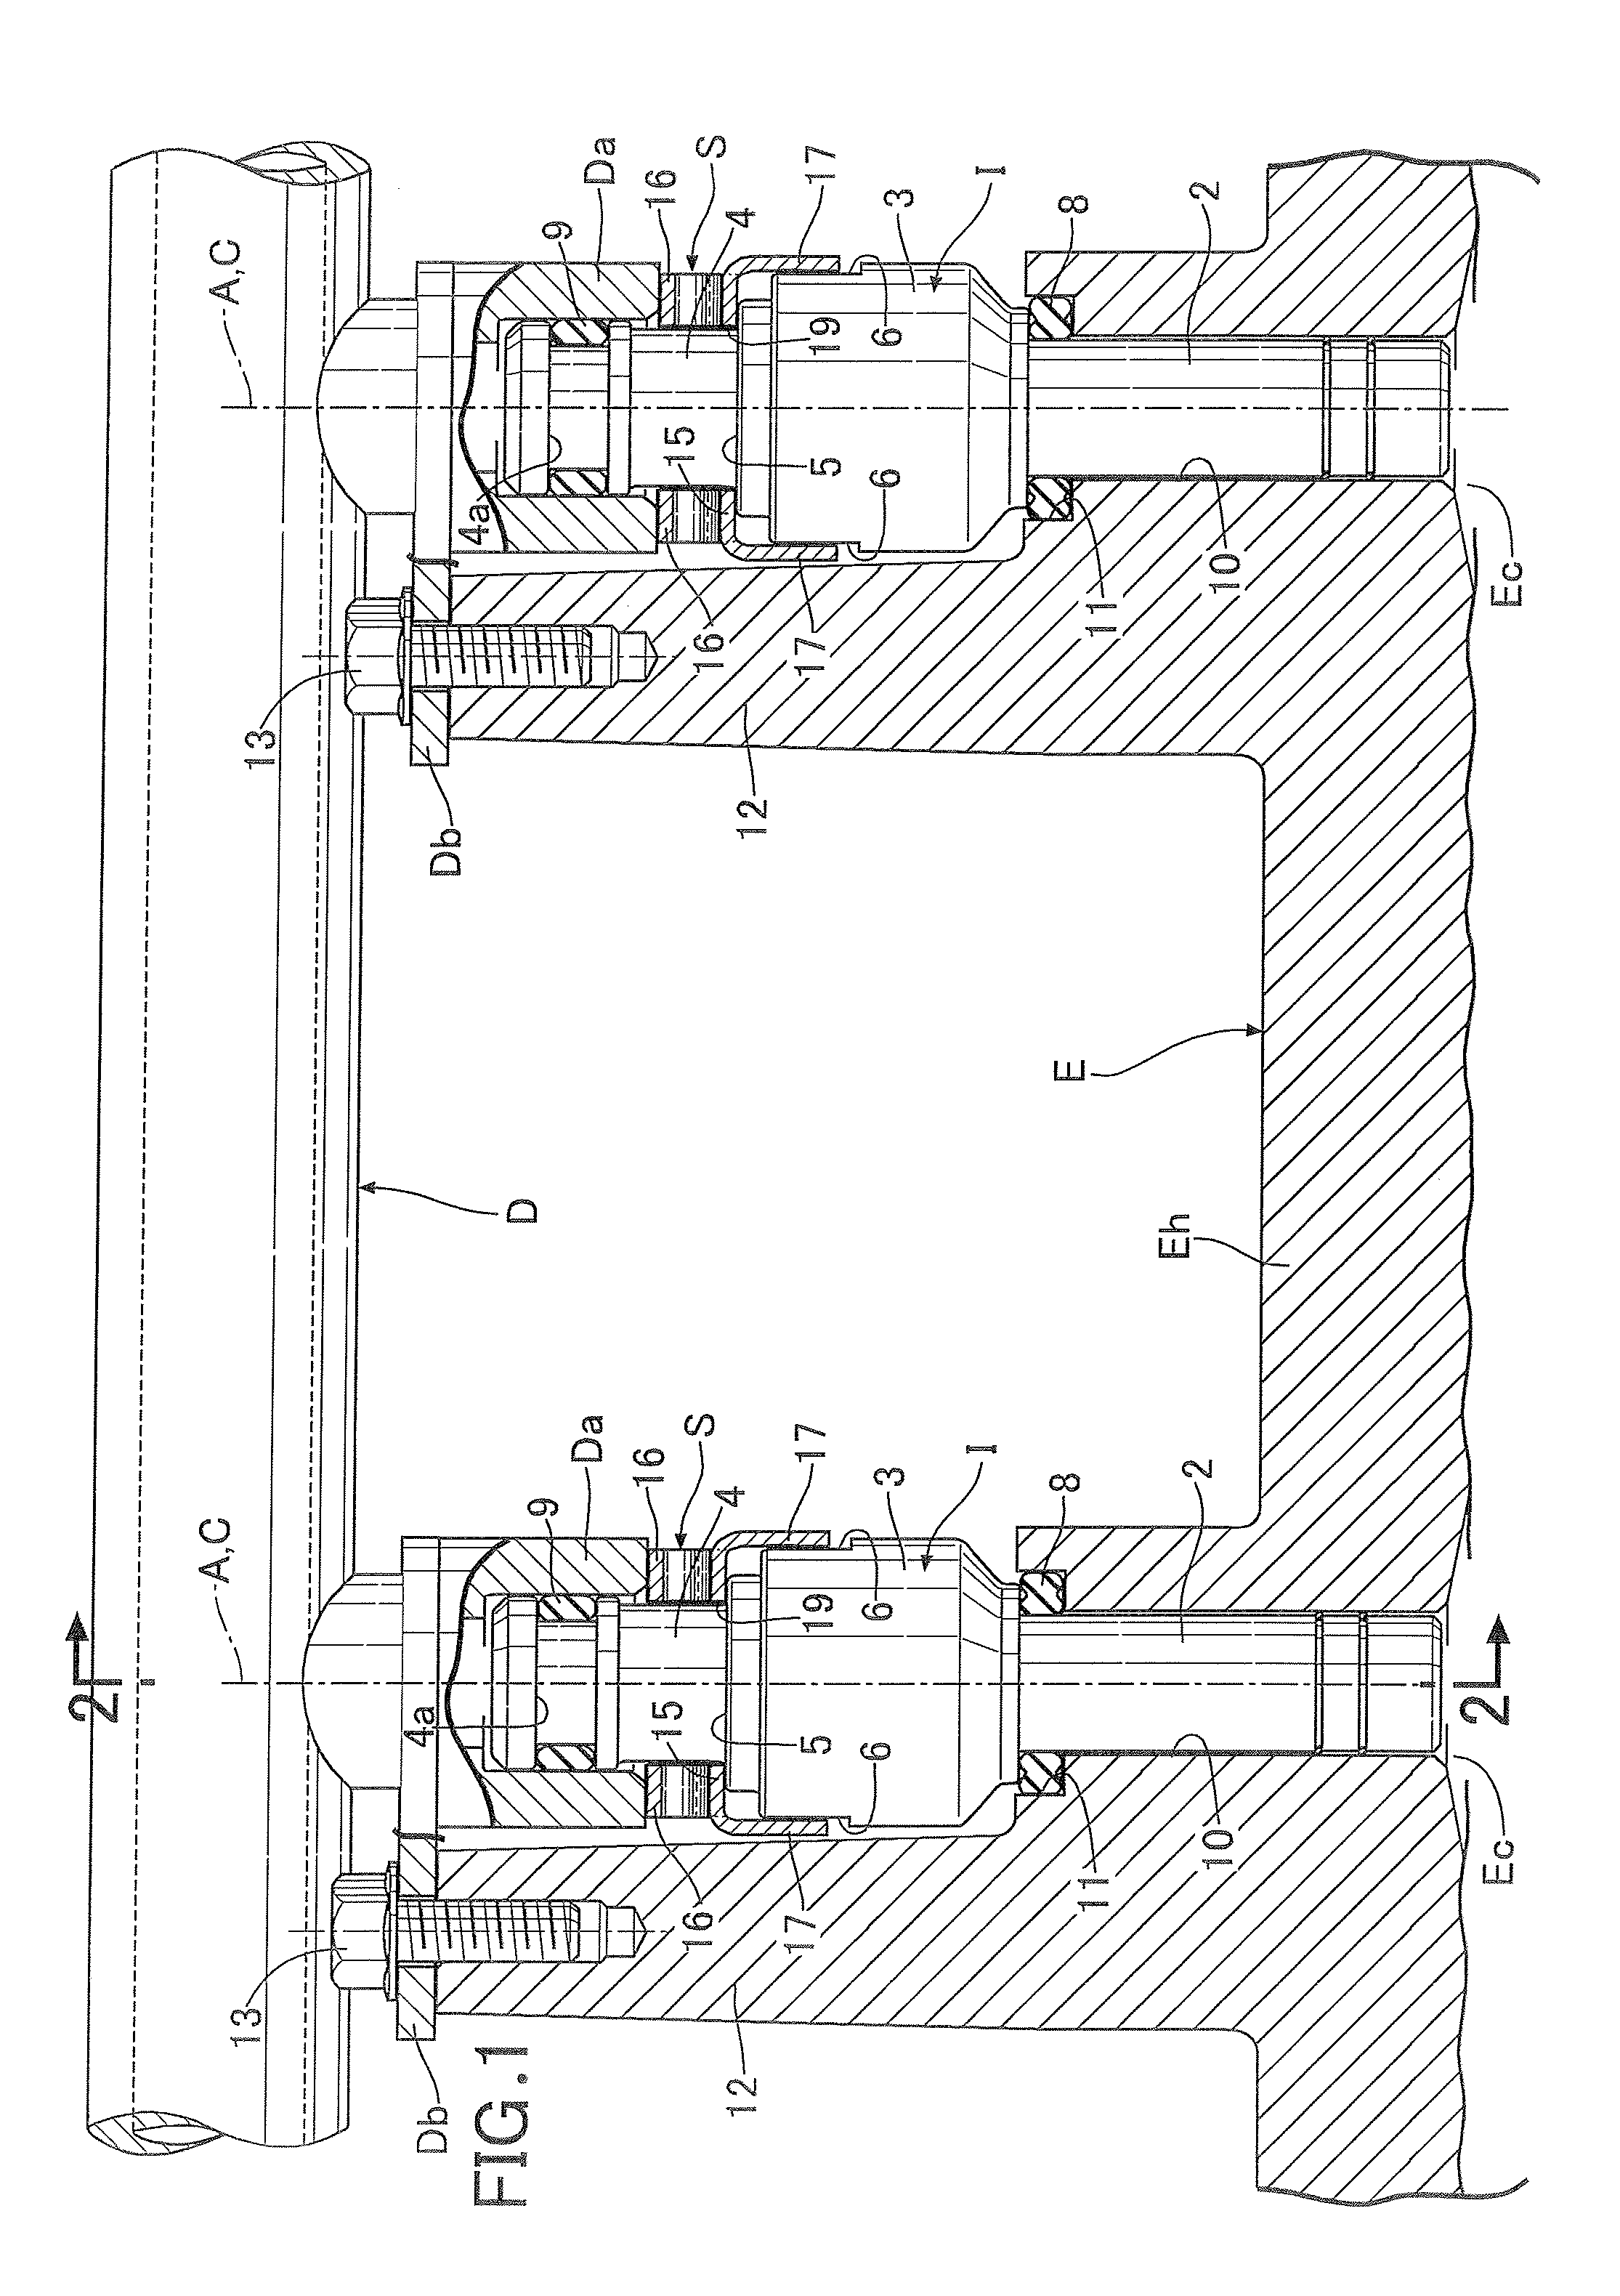 Fuel injection valve supporting structure